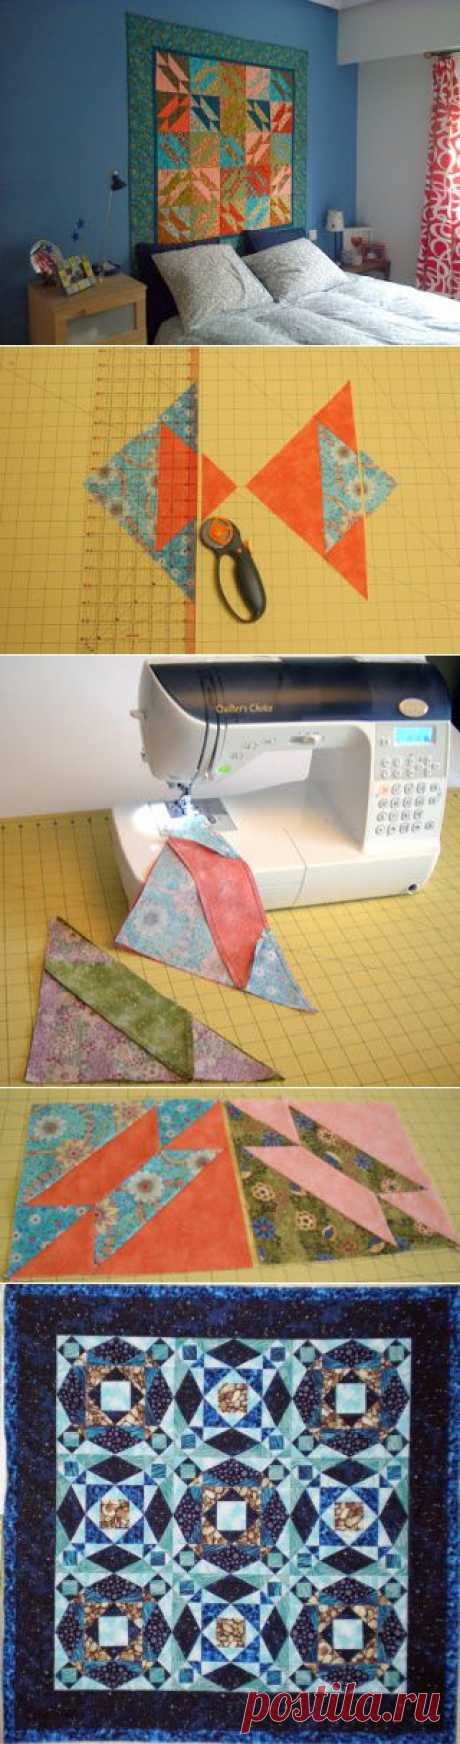 Debby Kratovil Quilts: Quilting Gallery Blog Hop Tutorial